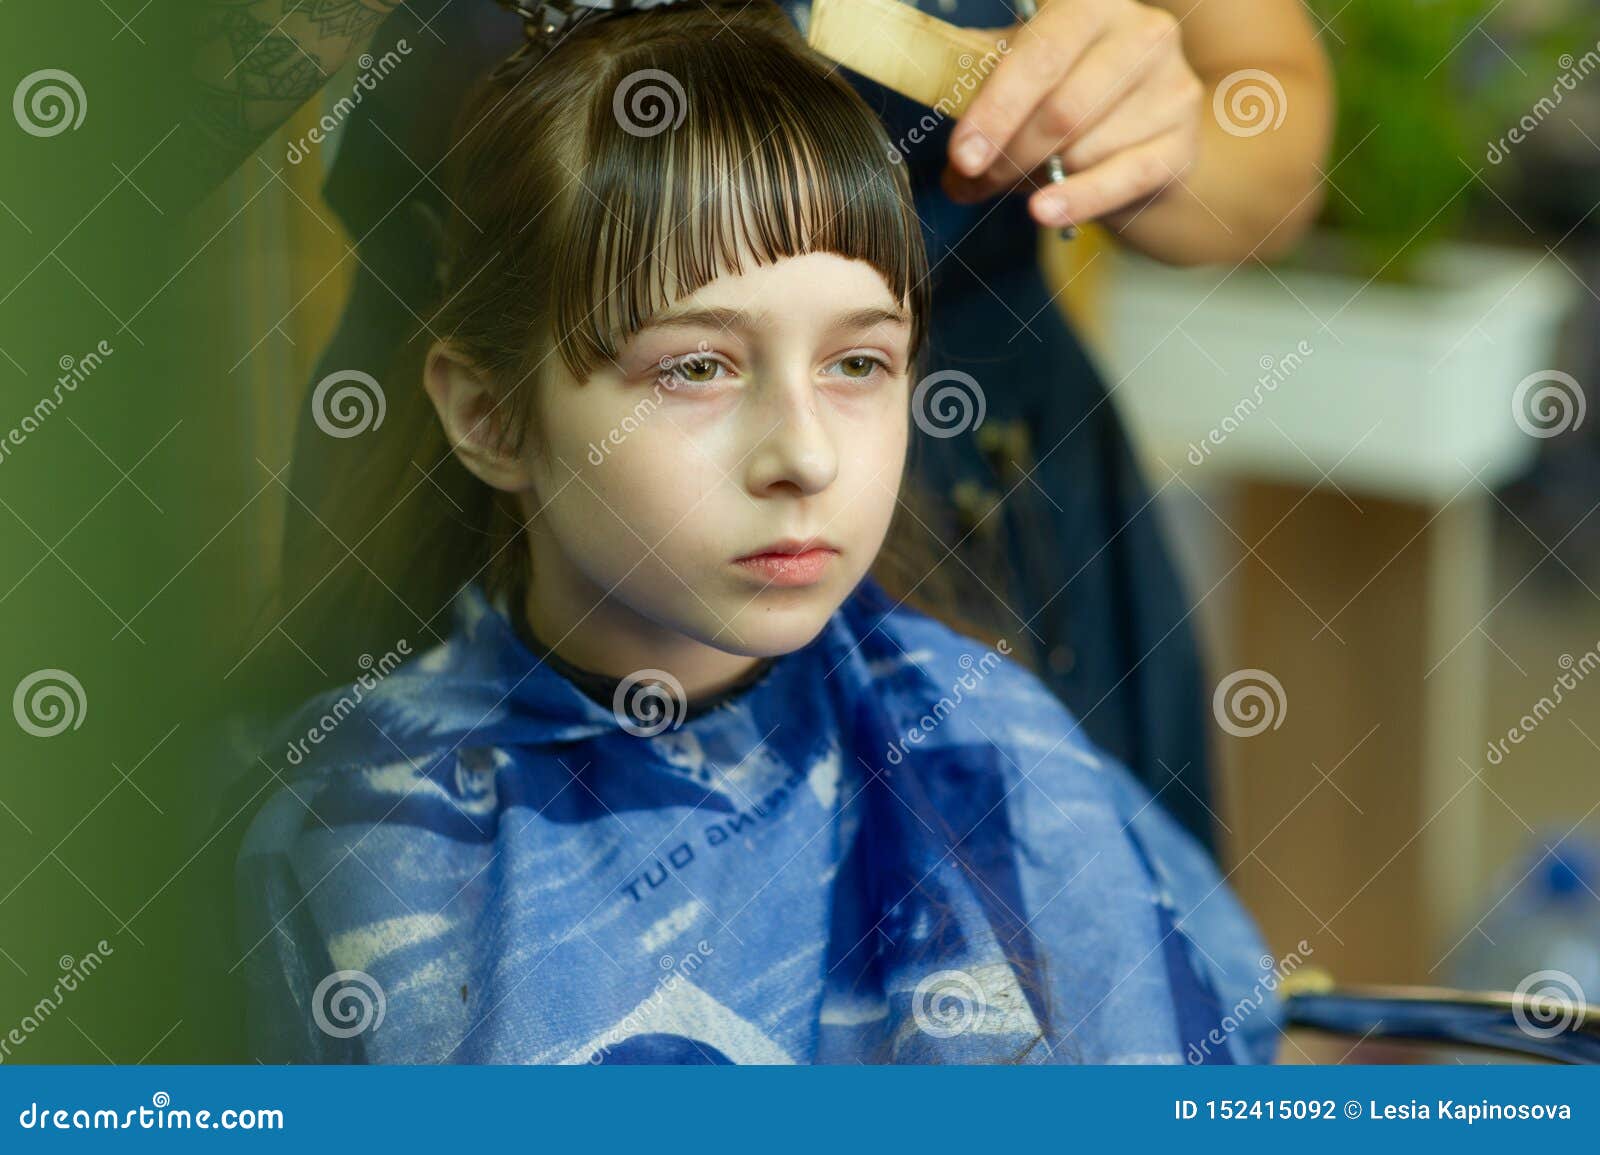 Baby Cut Hairstyle for Teenage Girl